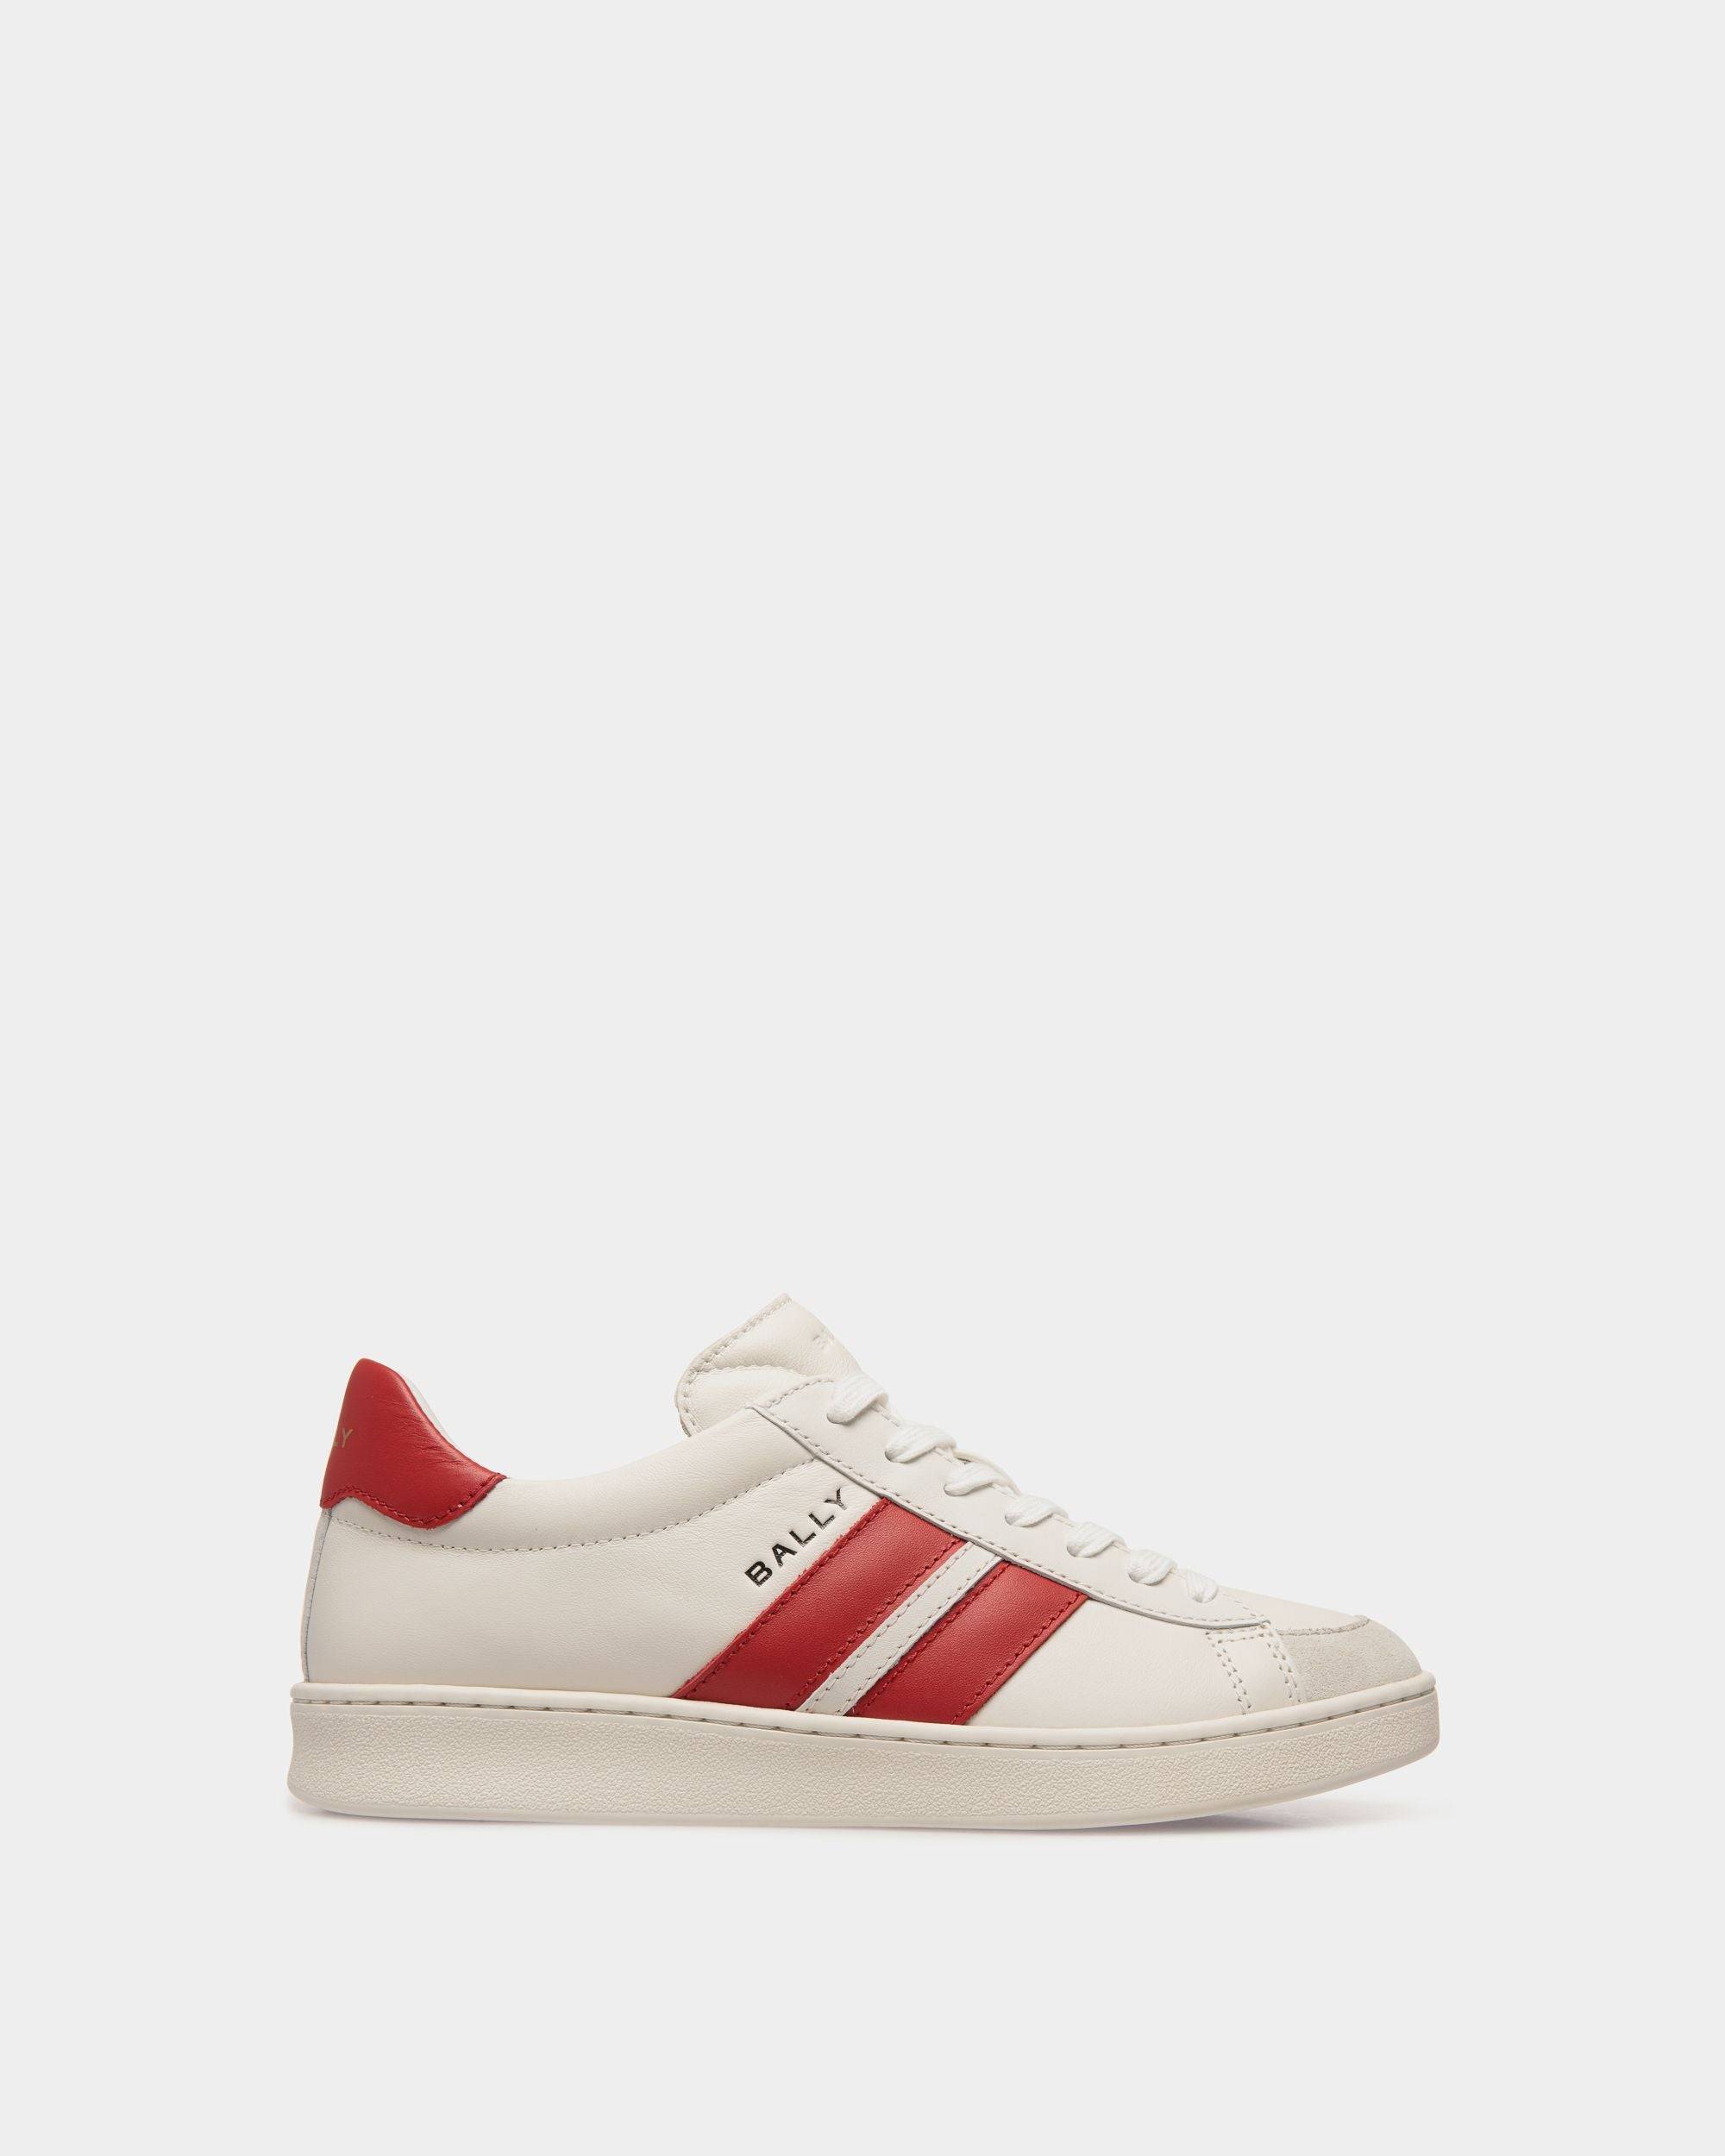 Tennis | Women's Sneaker in White and Candy Red Leather | Bally | Still Life Side